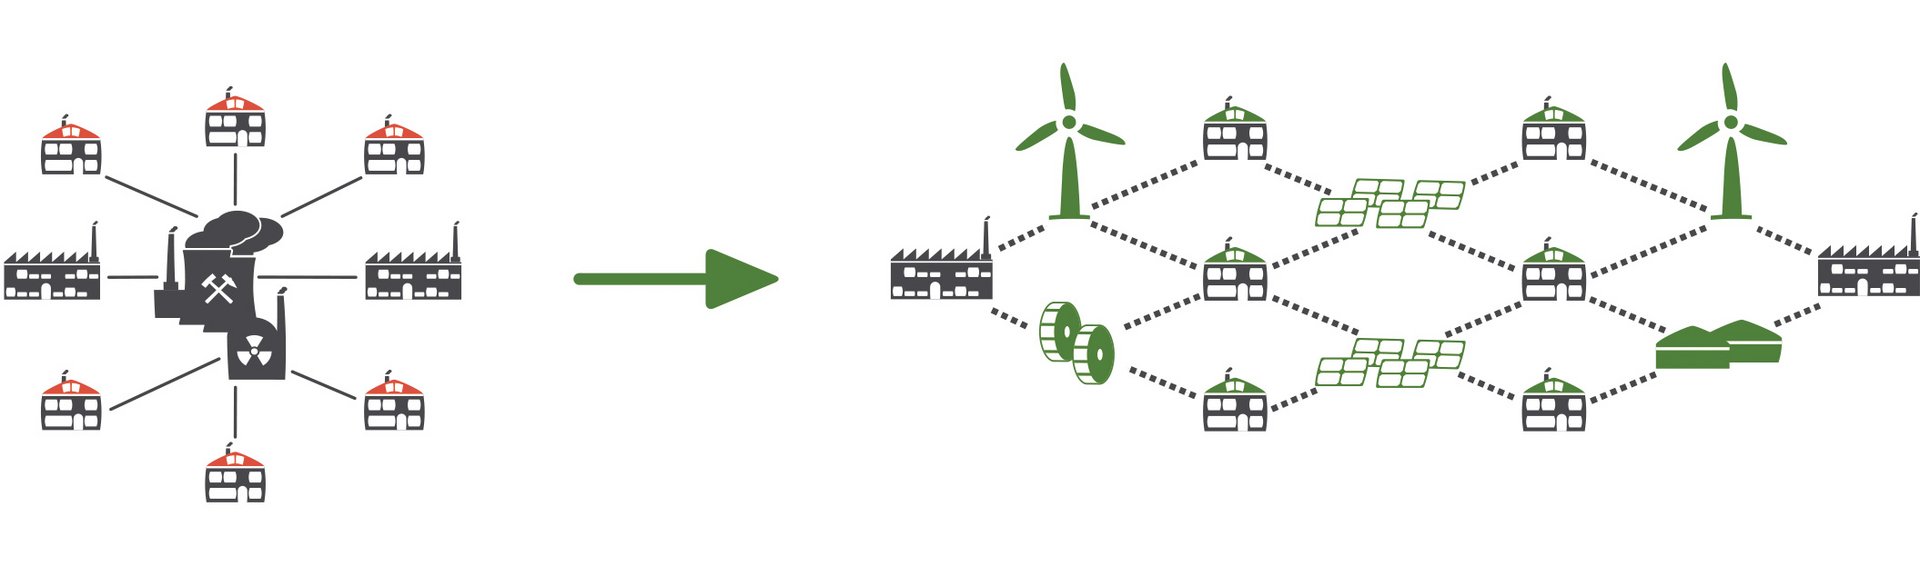 Future energy supply: 100% renewable energies from decentralized green power plants